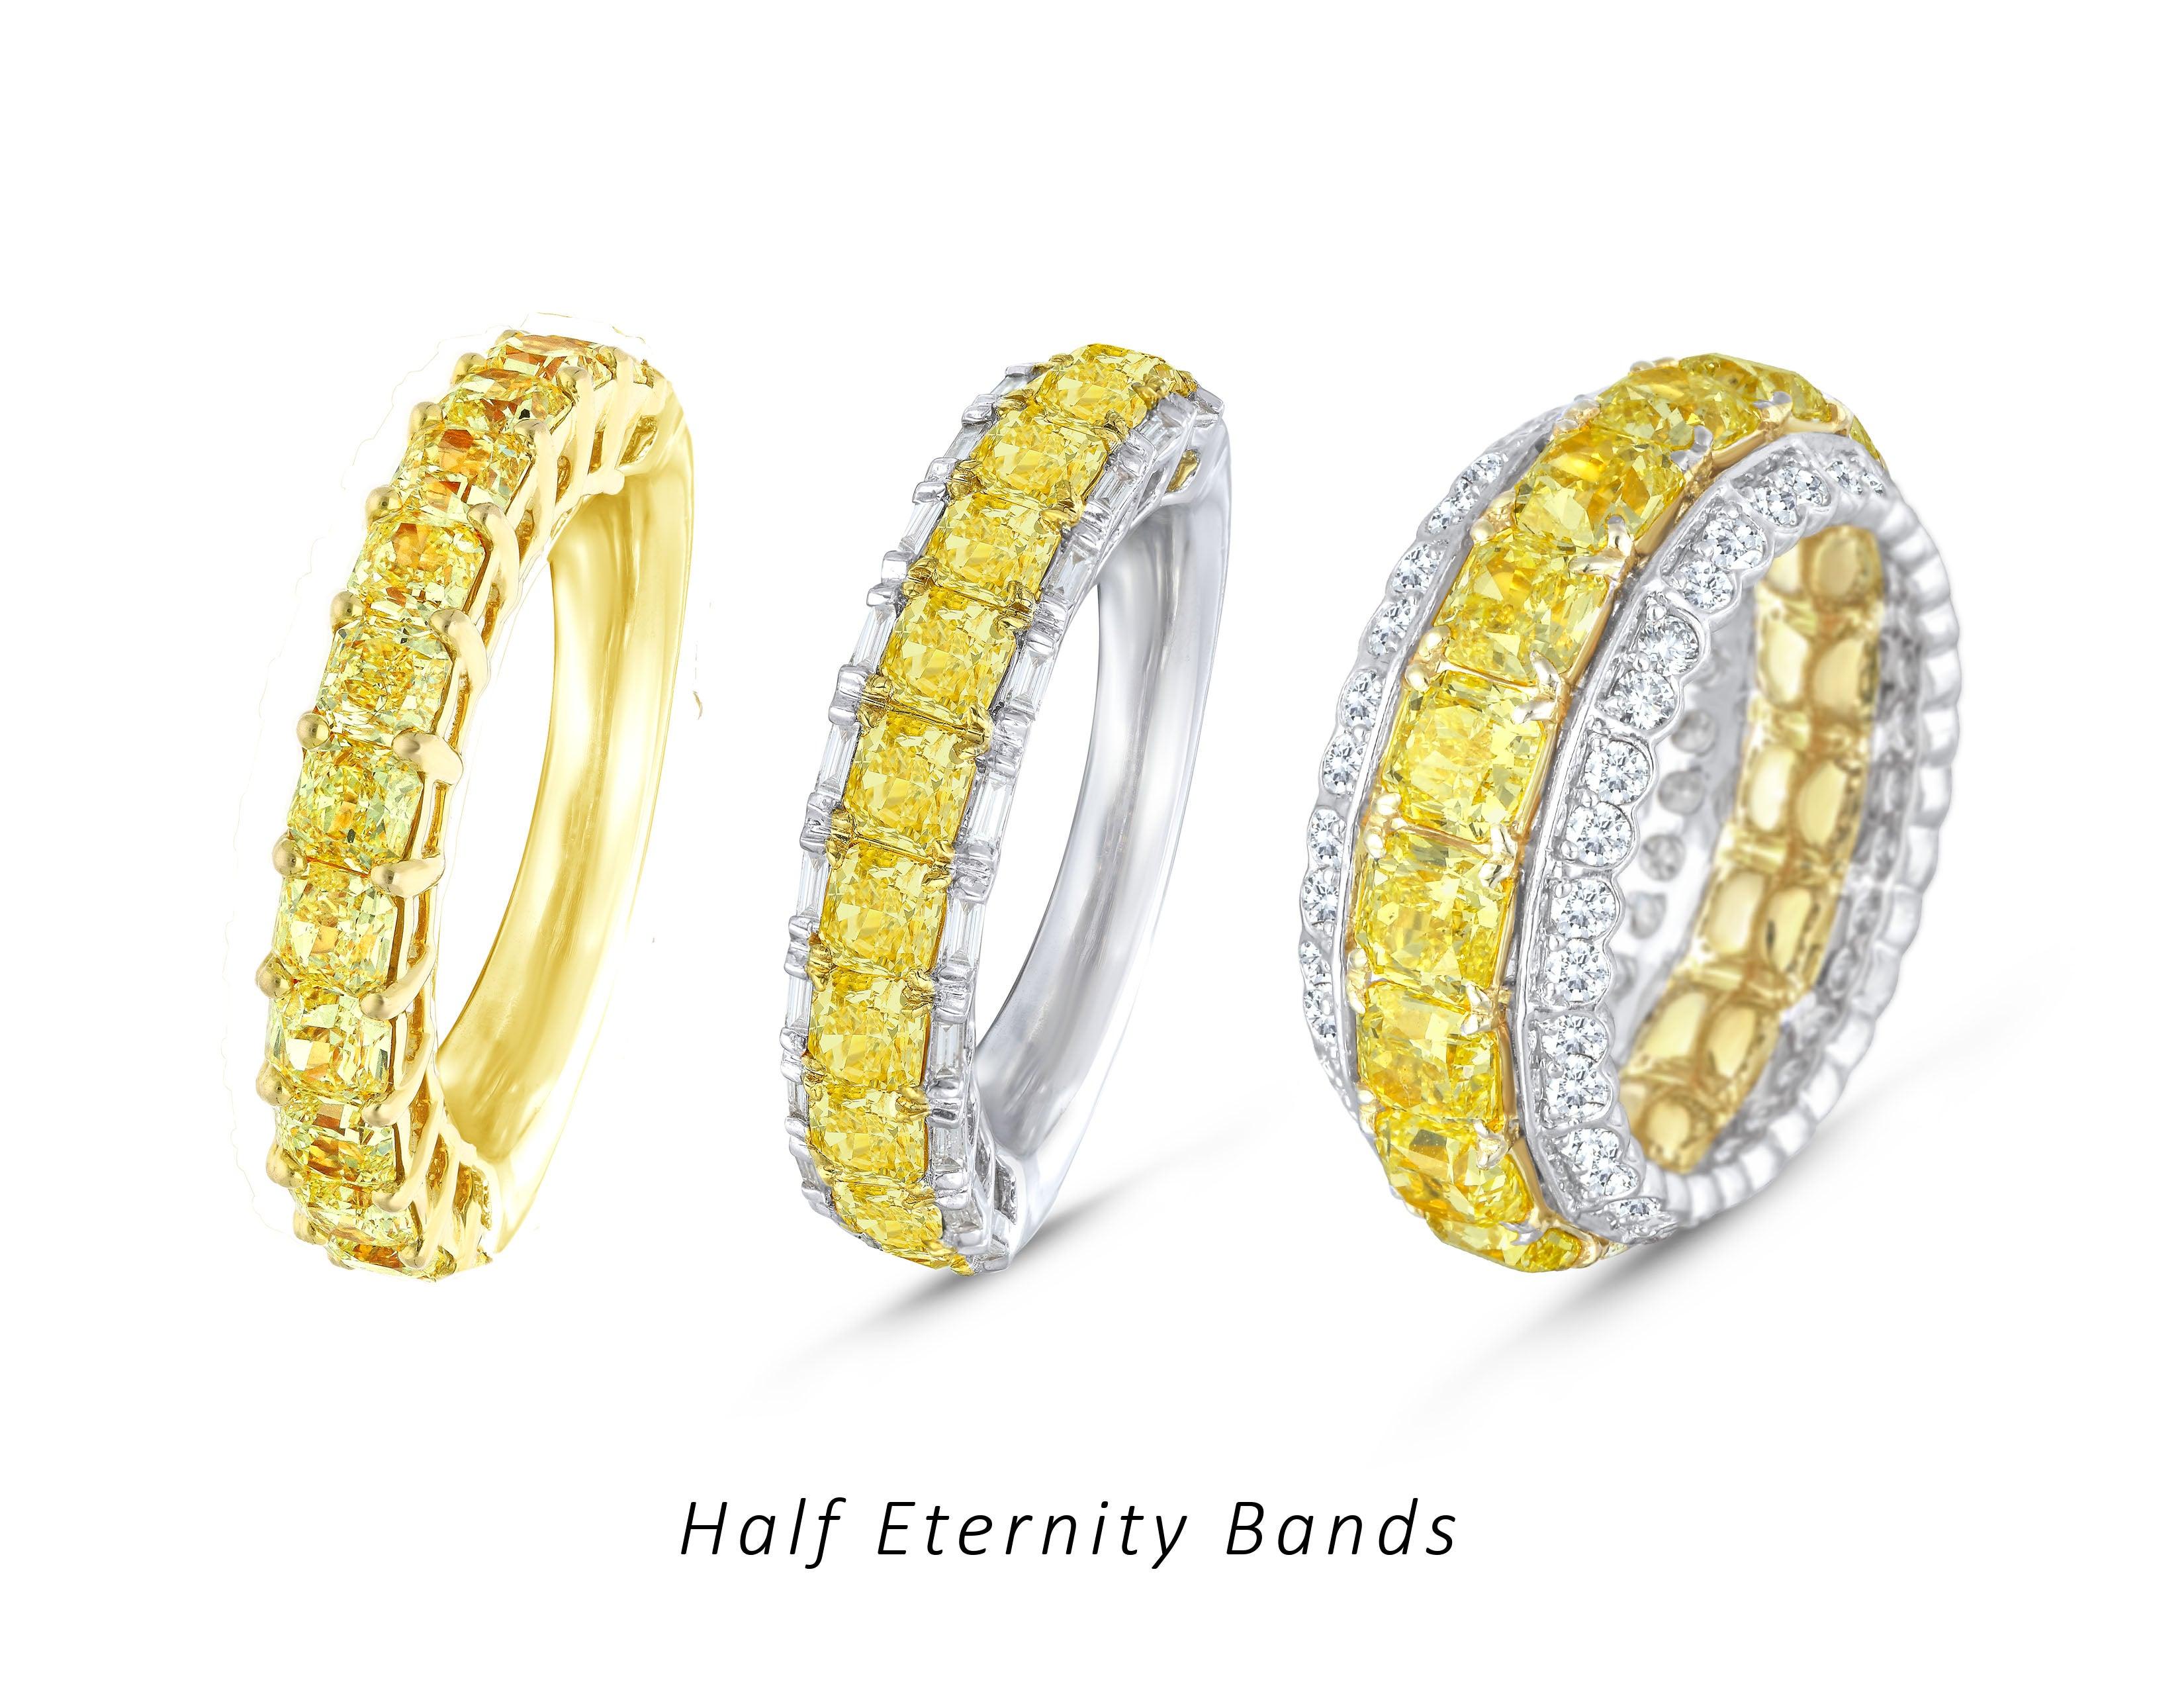 For Sale:  Classic Yellow Half Eternity Band, 3.05 Carat 4